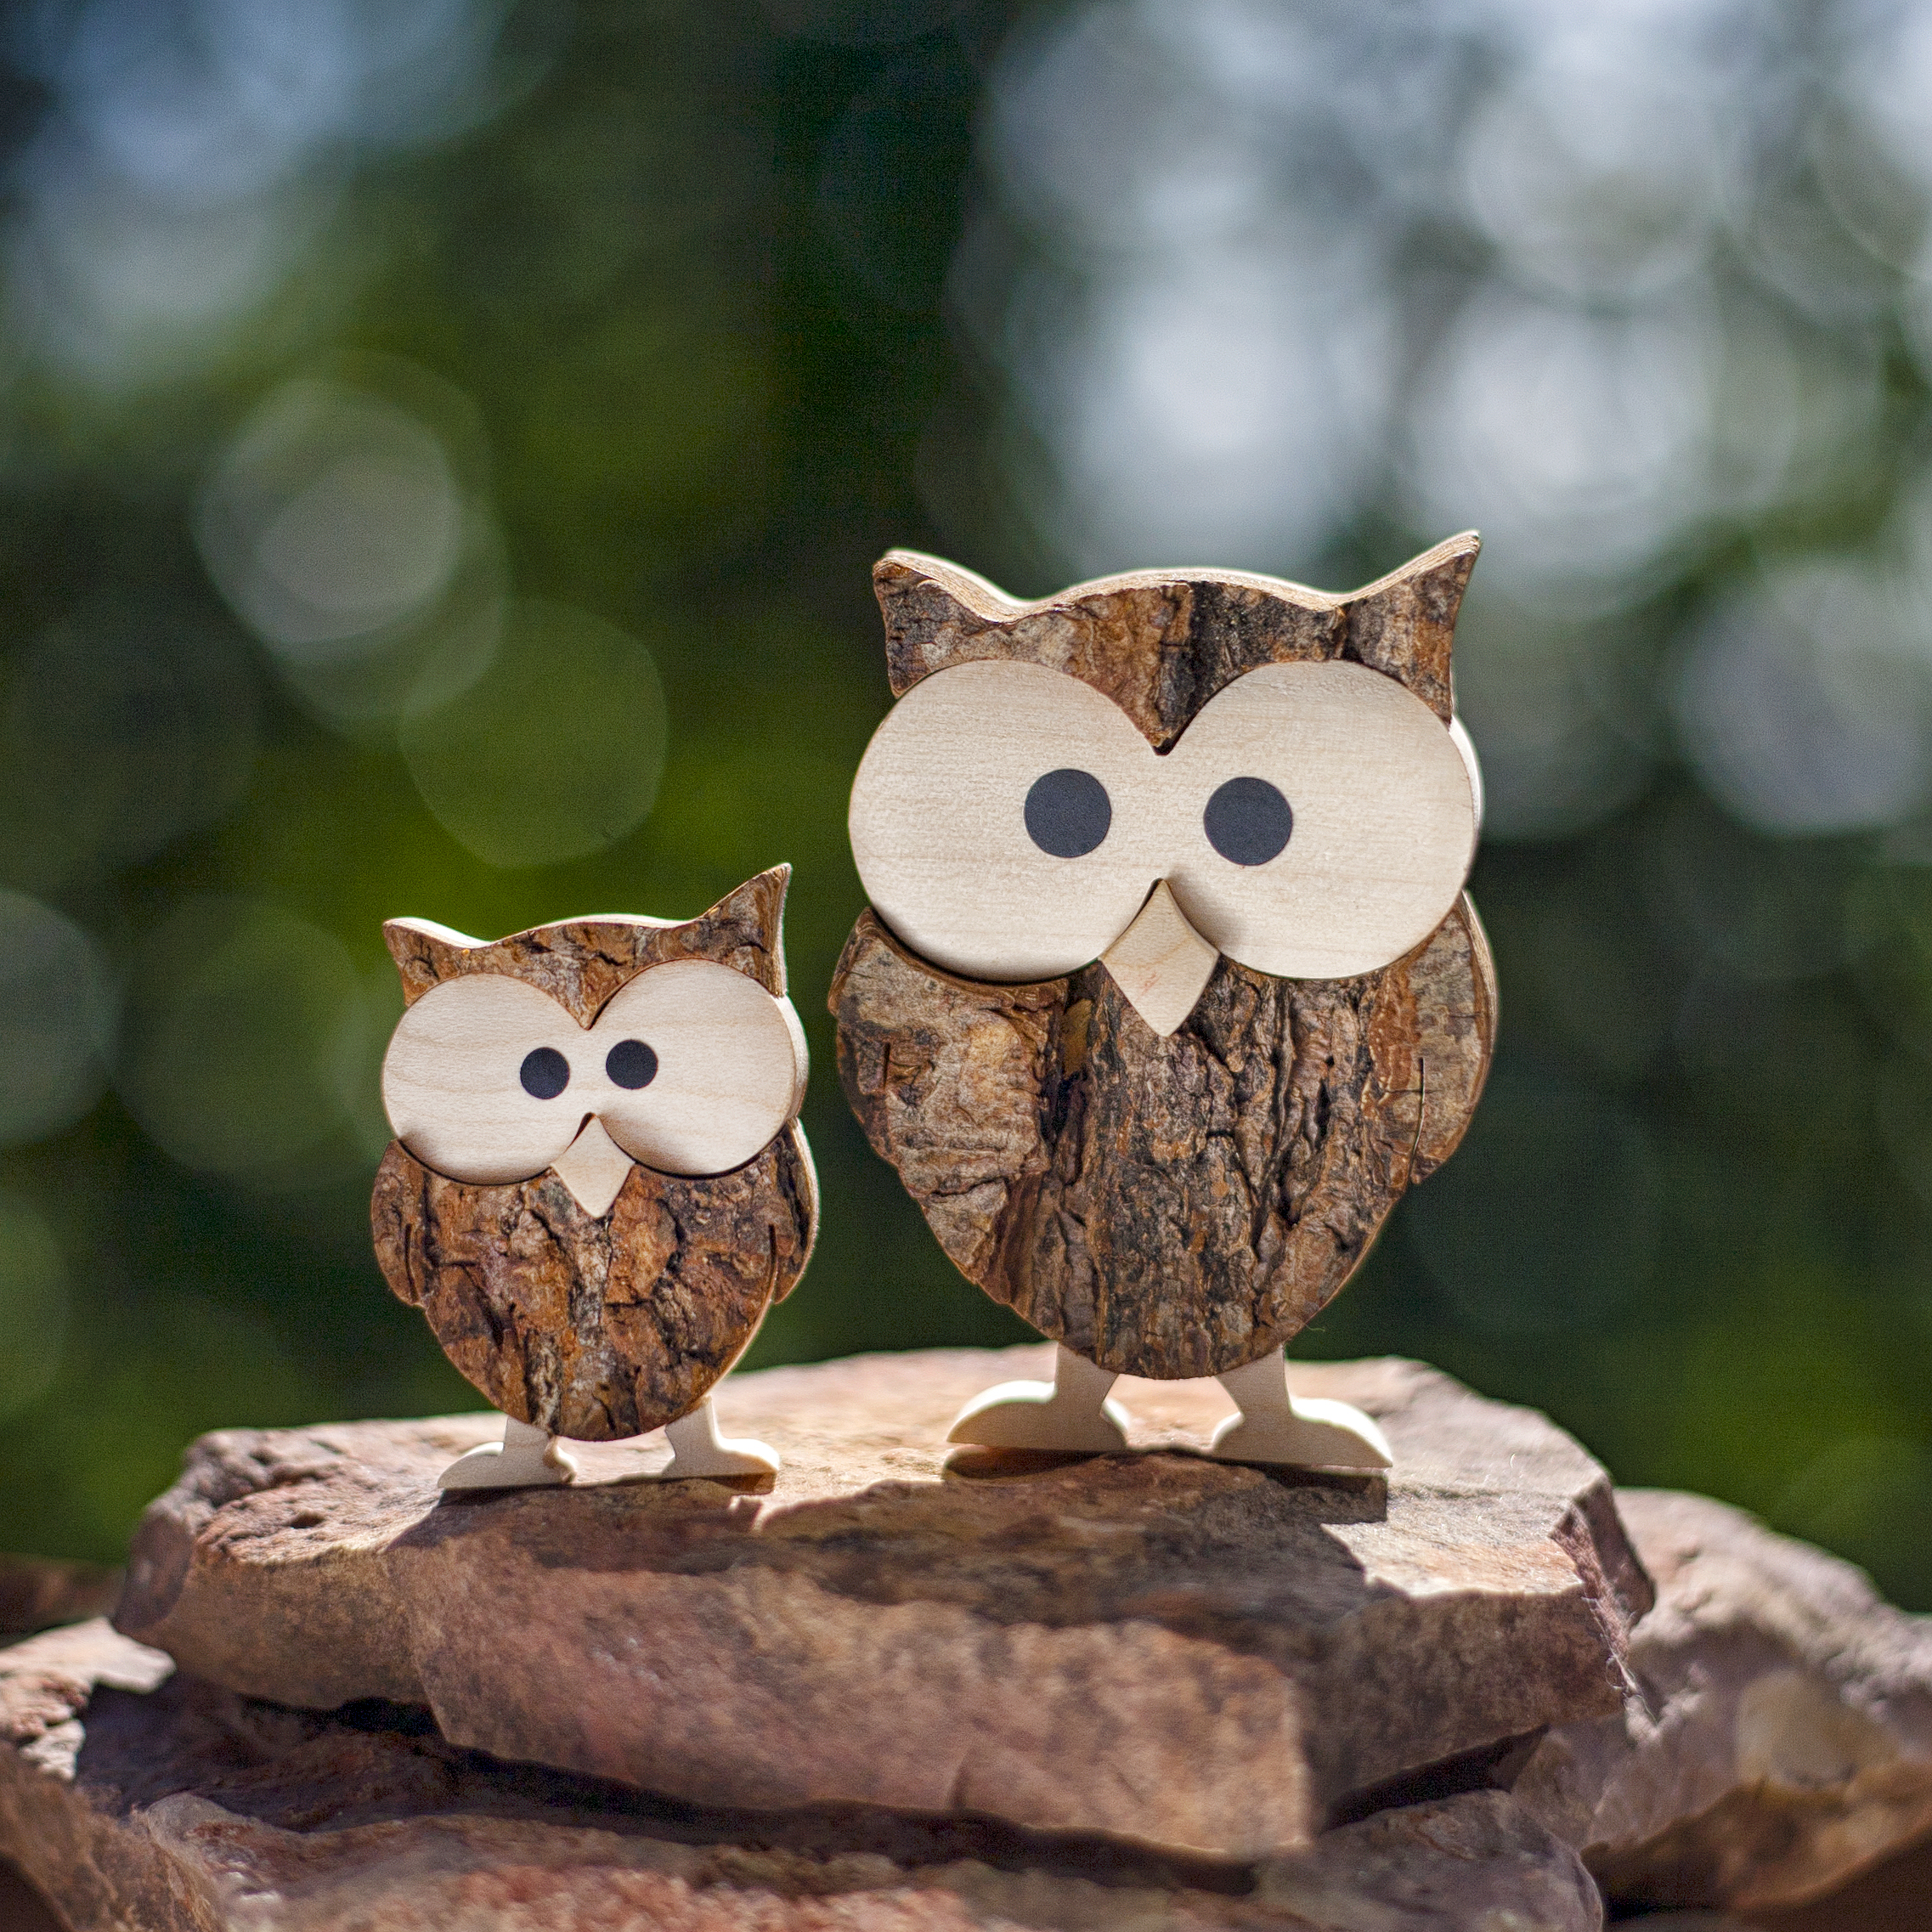 Rustic Owl Figurines For Home Decor - 2 Pcs